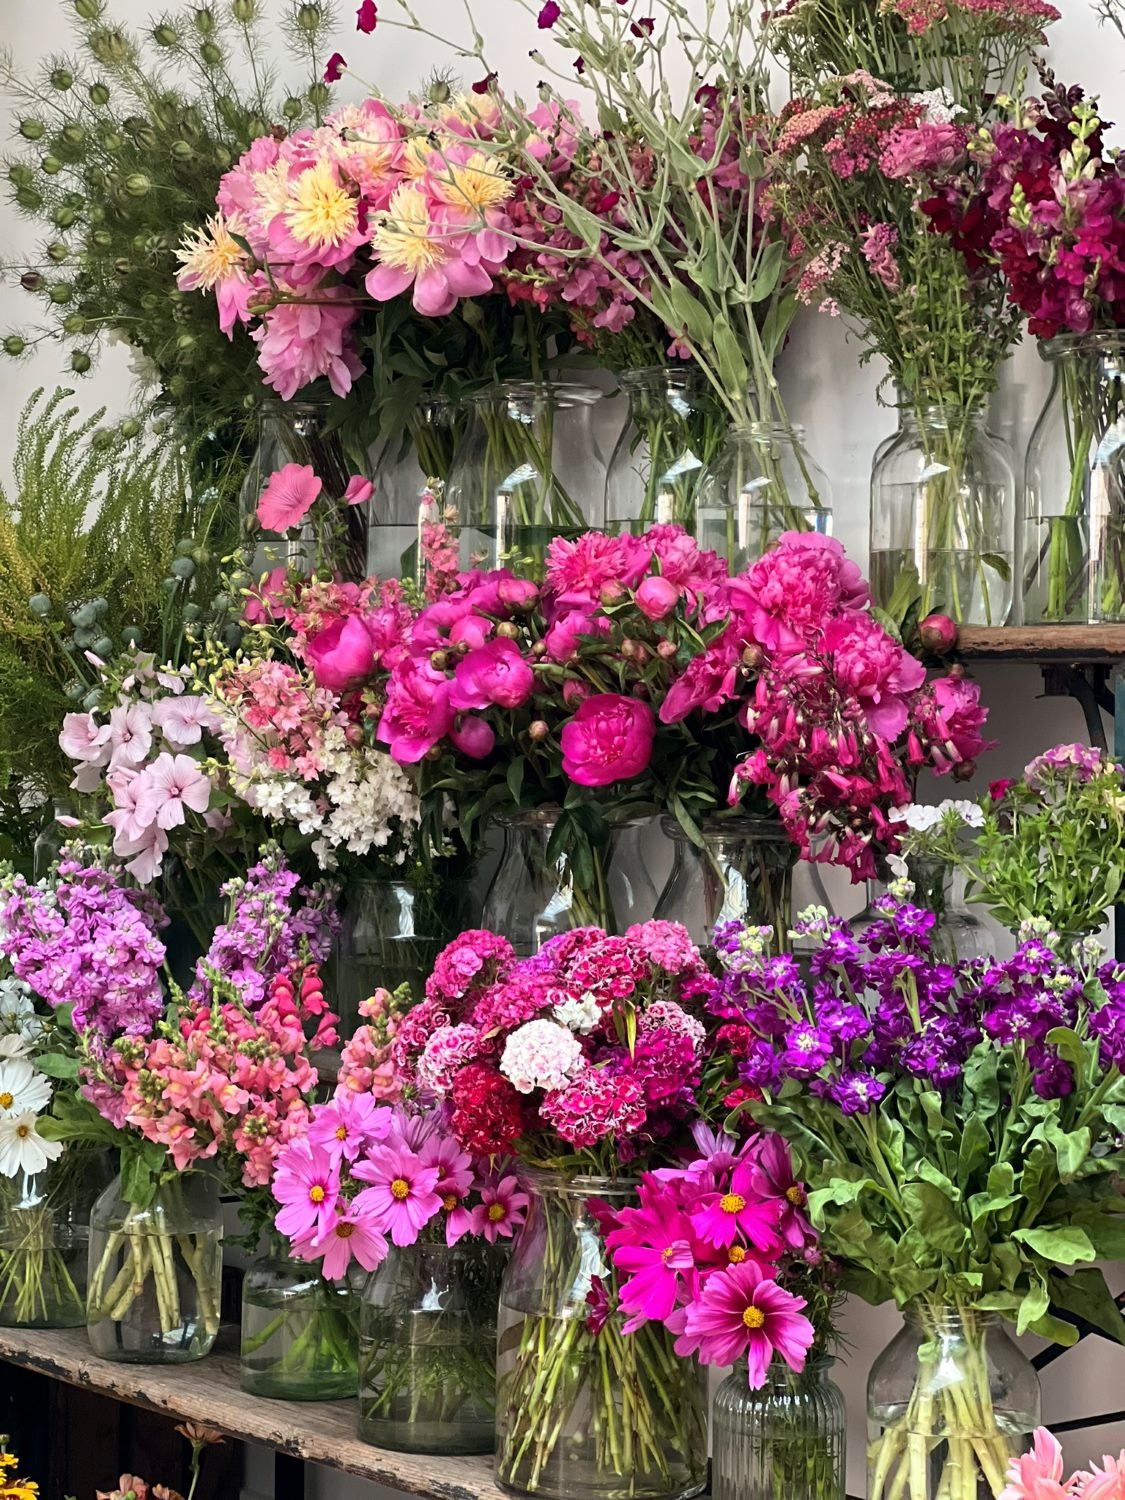 The Bath Flower School's stand full of brightly coloured British flowers